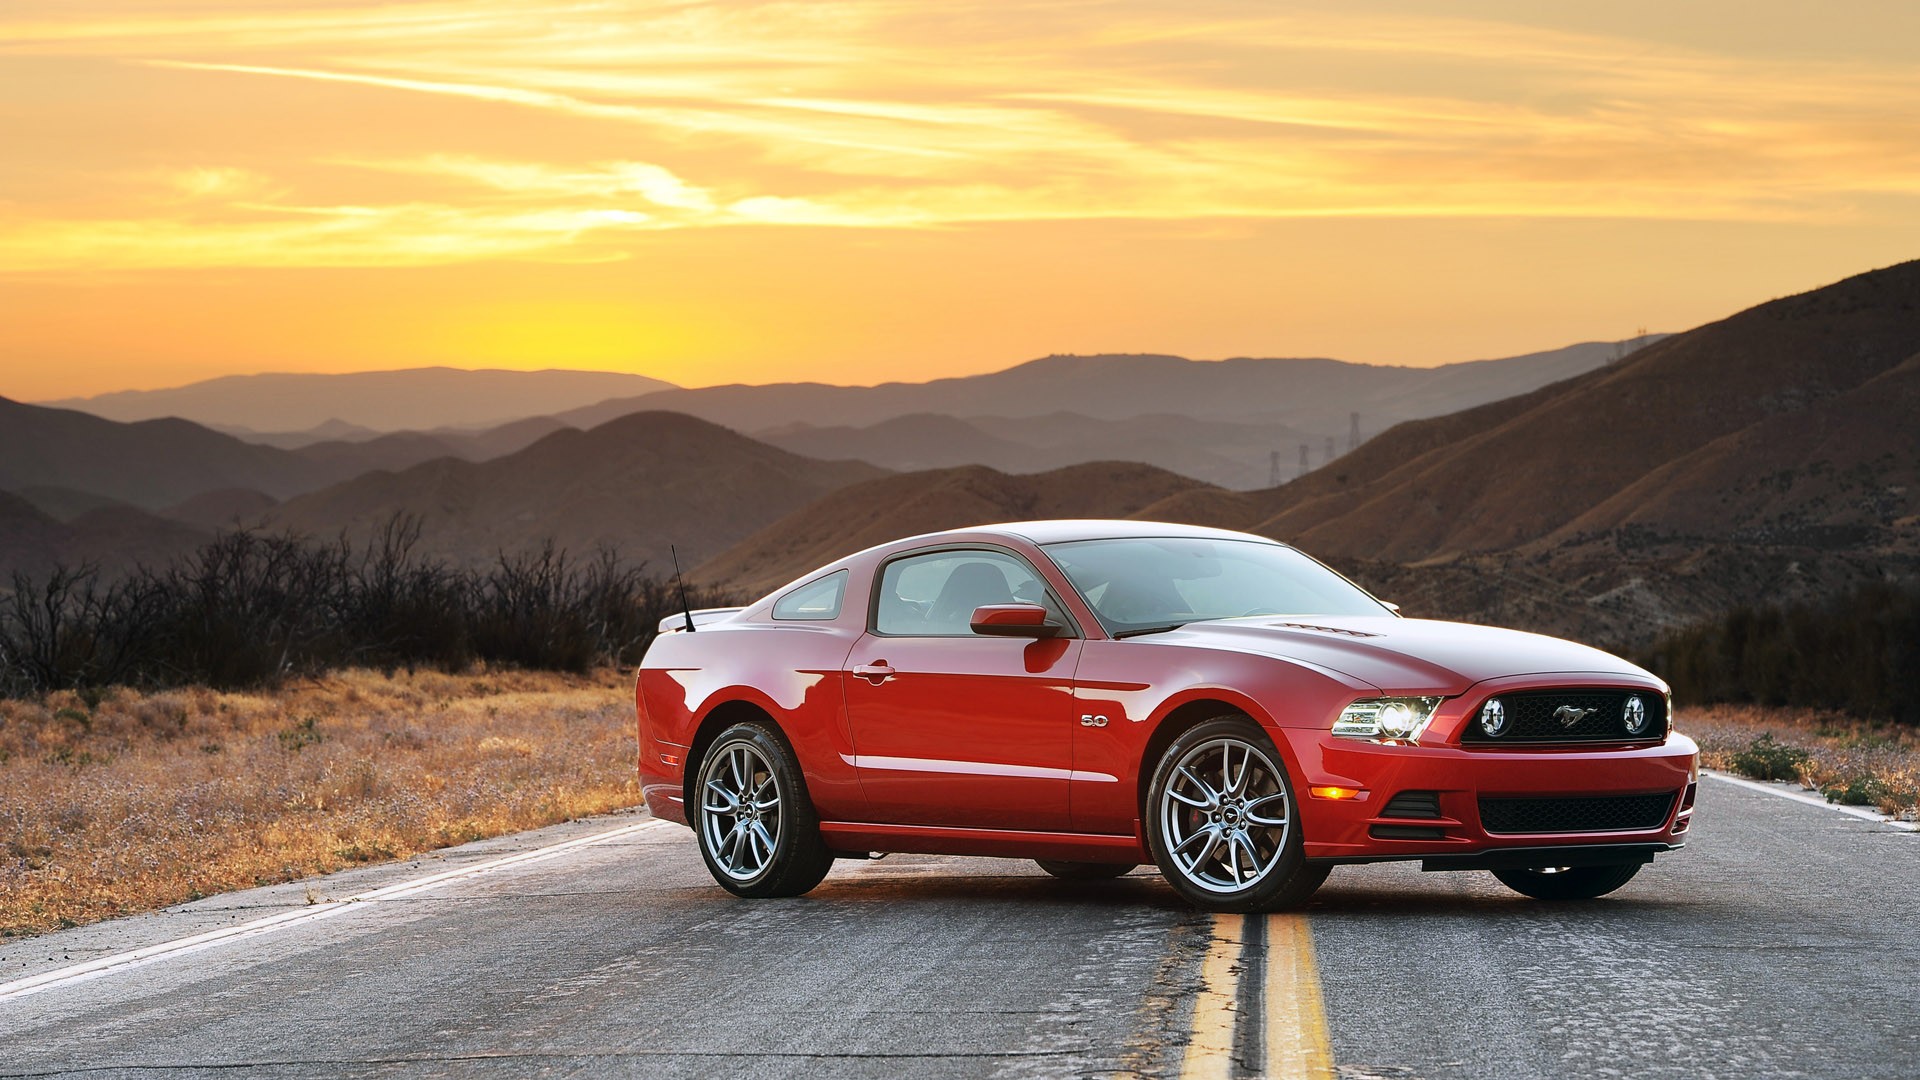 Ford Mustang Wallpaper Px High